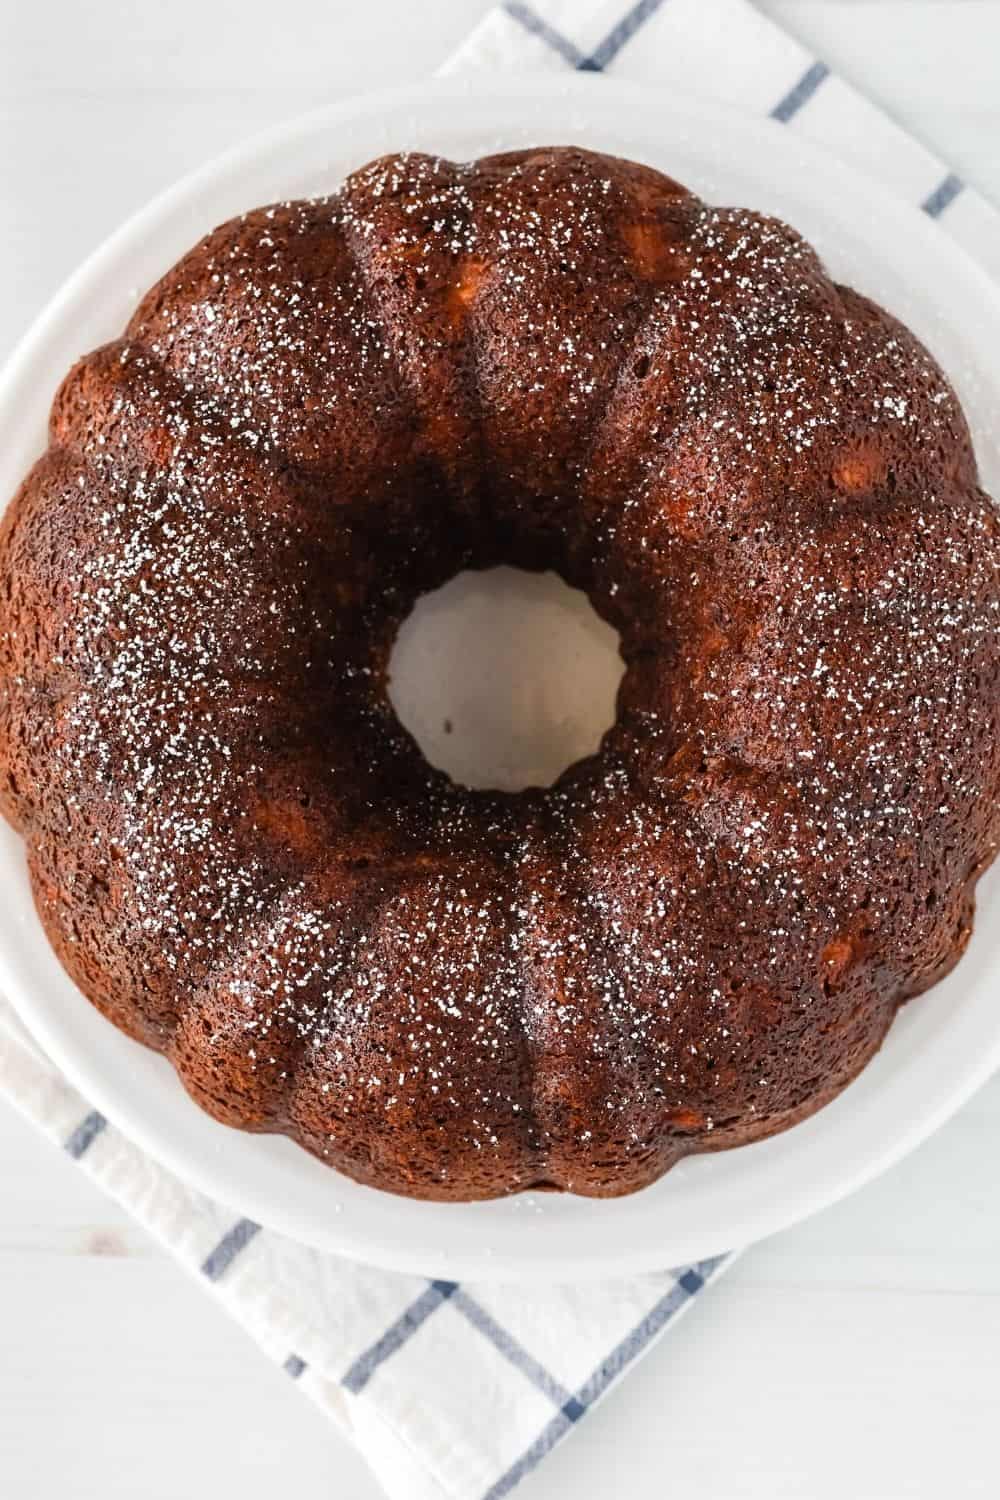 overhead view of a pear and banana bundt cake on a white serving plate, dusted with powdered sugar.